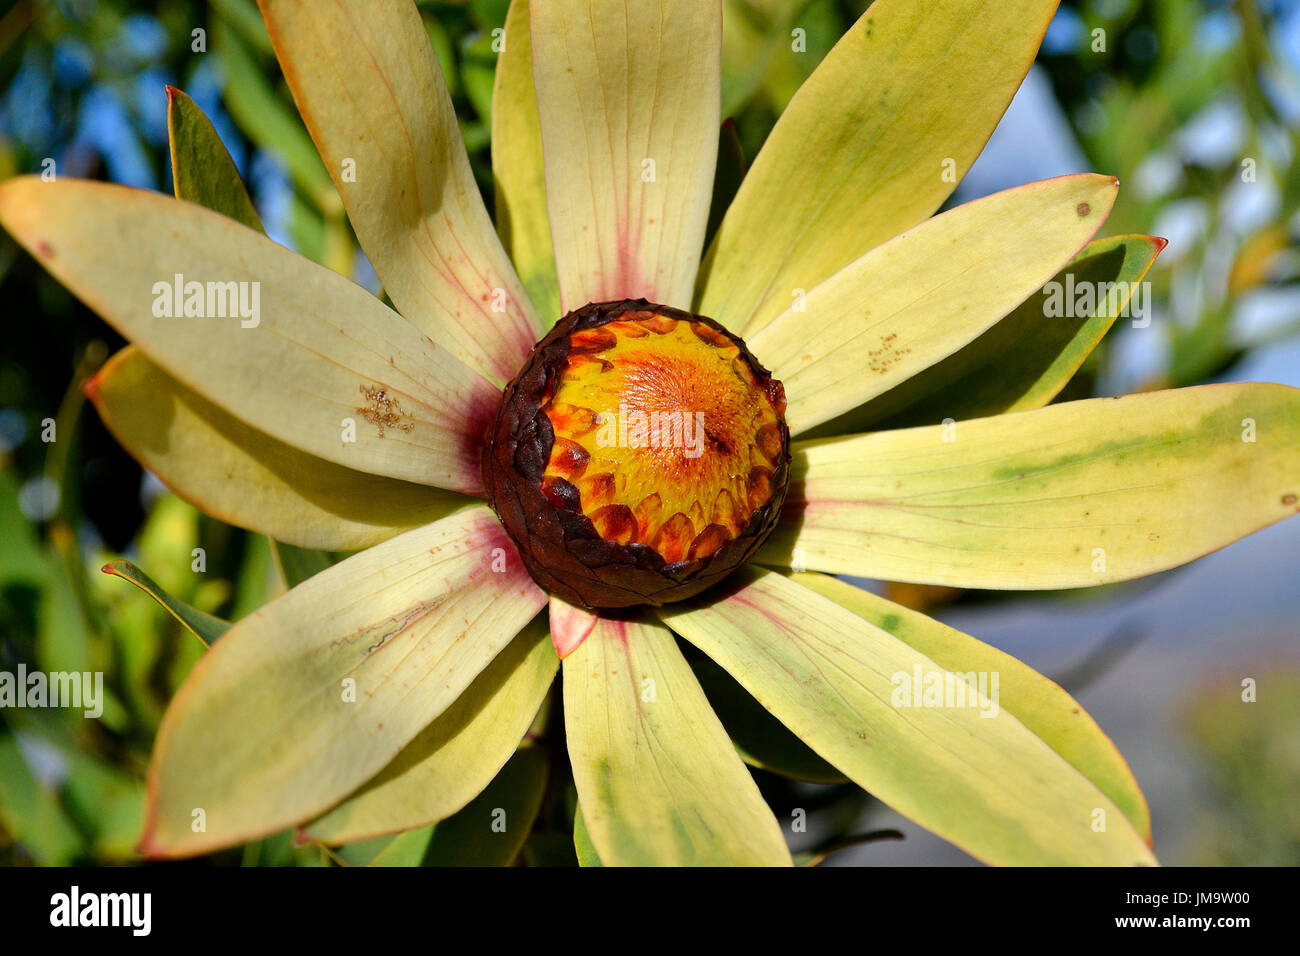 Western Sun Bush (Leucadendron sessile) growing and flowering gloriously on the Helderberg Mountain, South Africa. Stock Photo